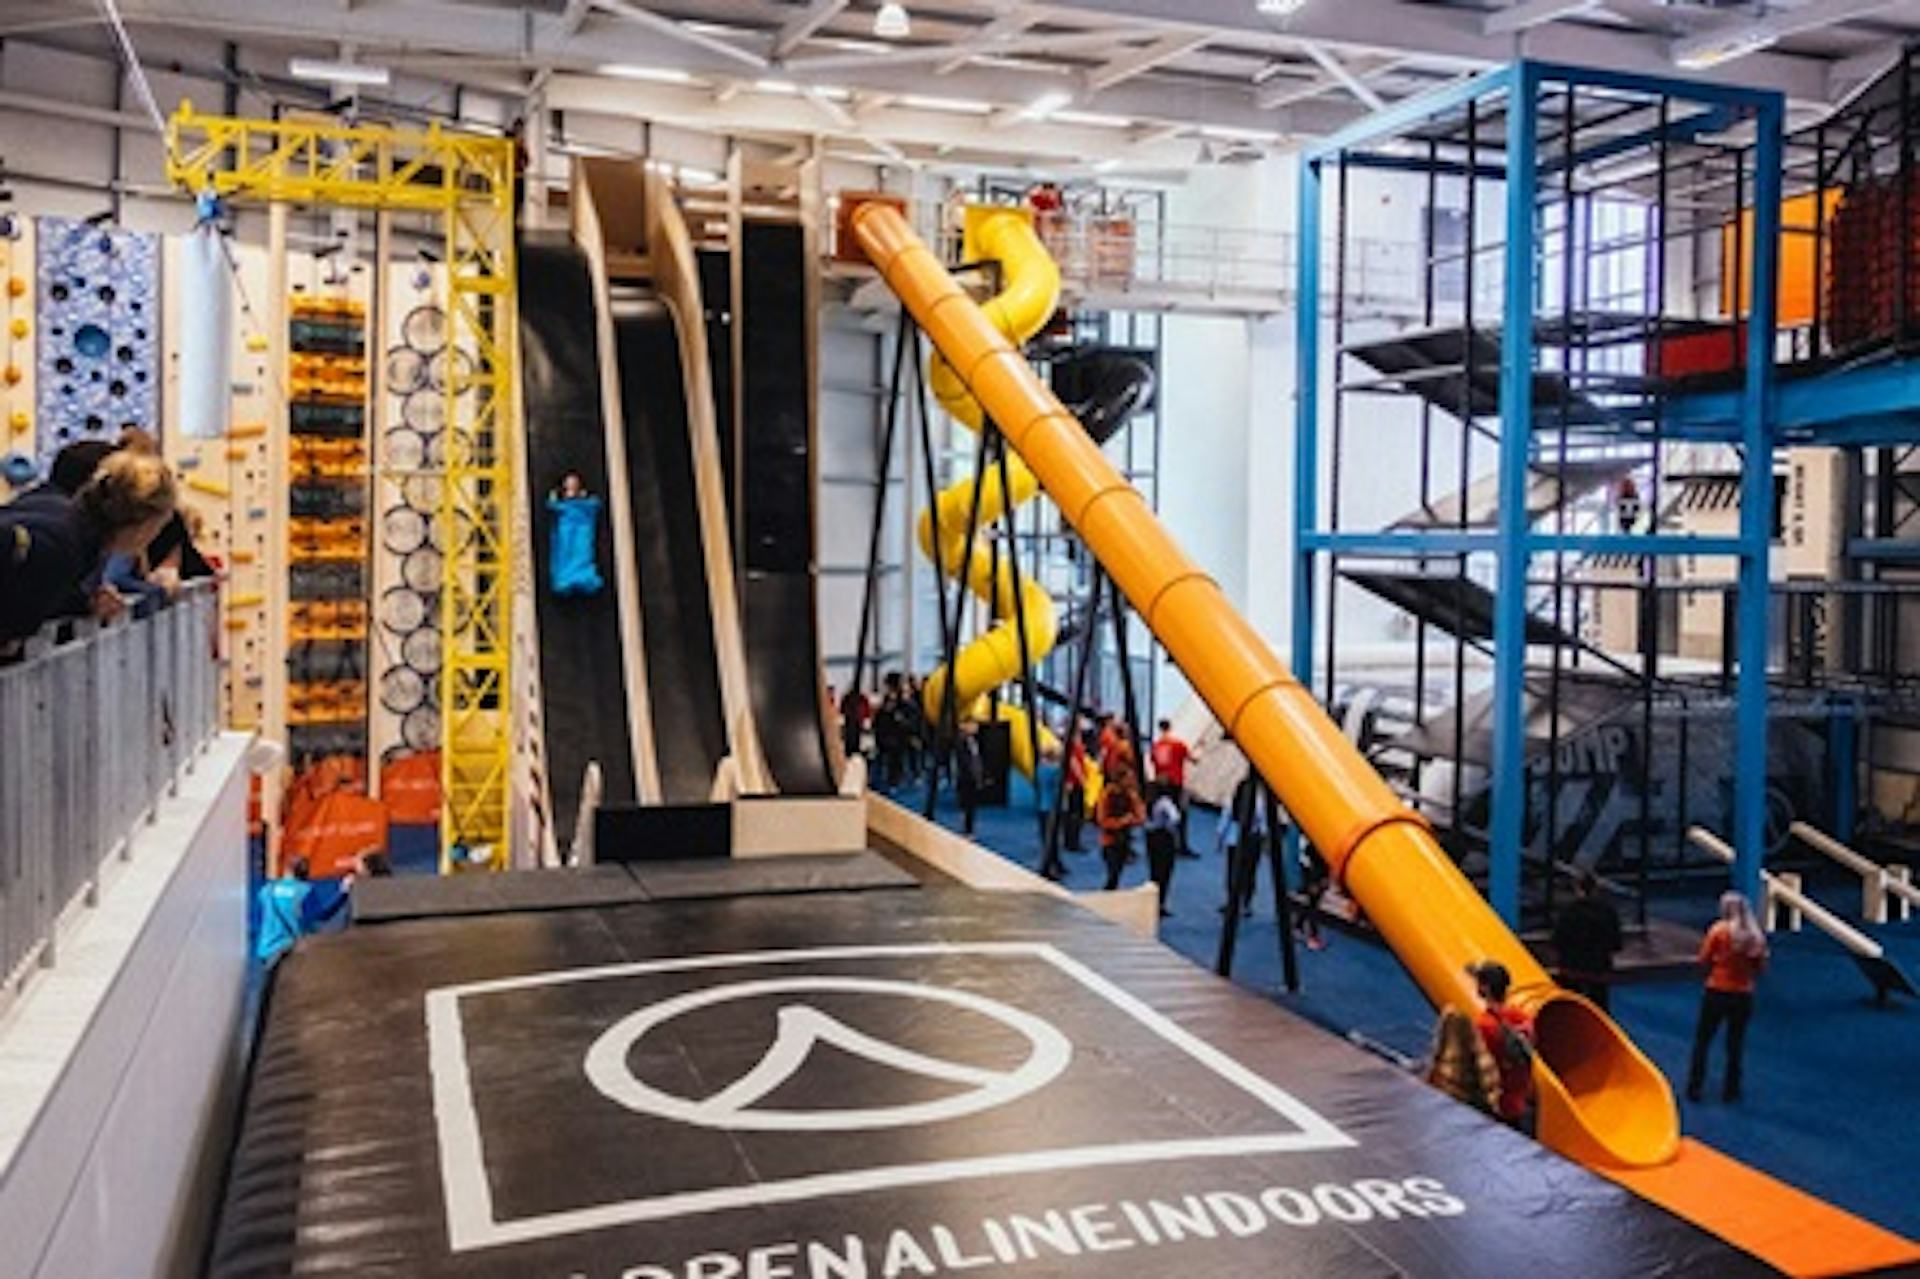 Indoor Aerial Assault and Slides Pass for Two at Adventure Parc Snowdonia